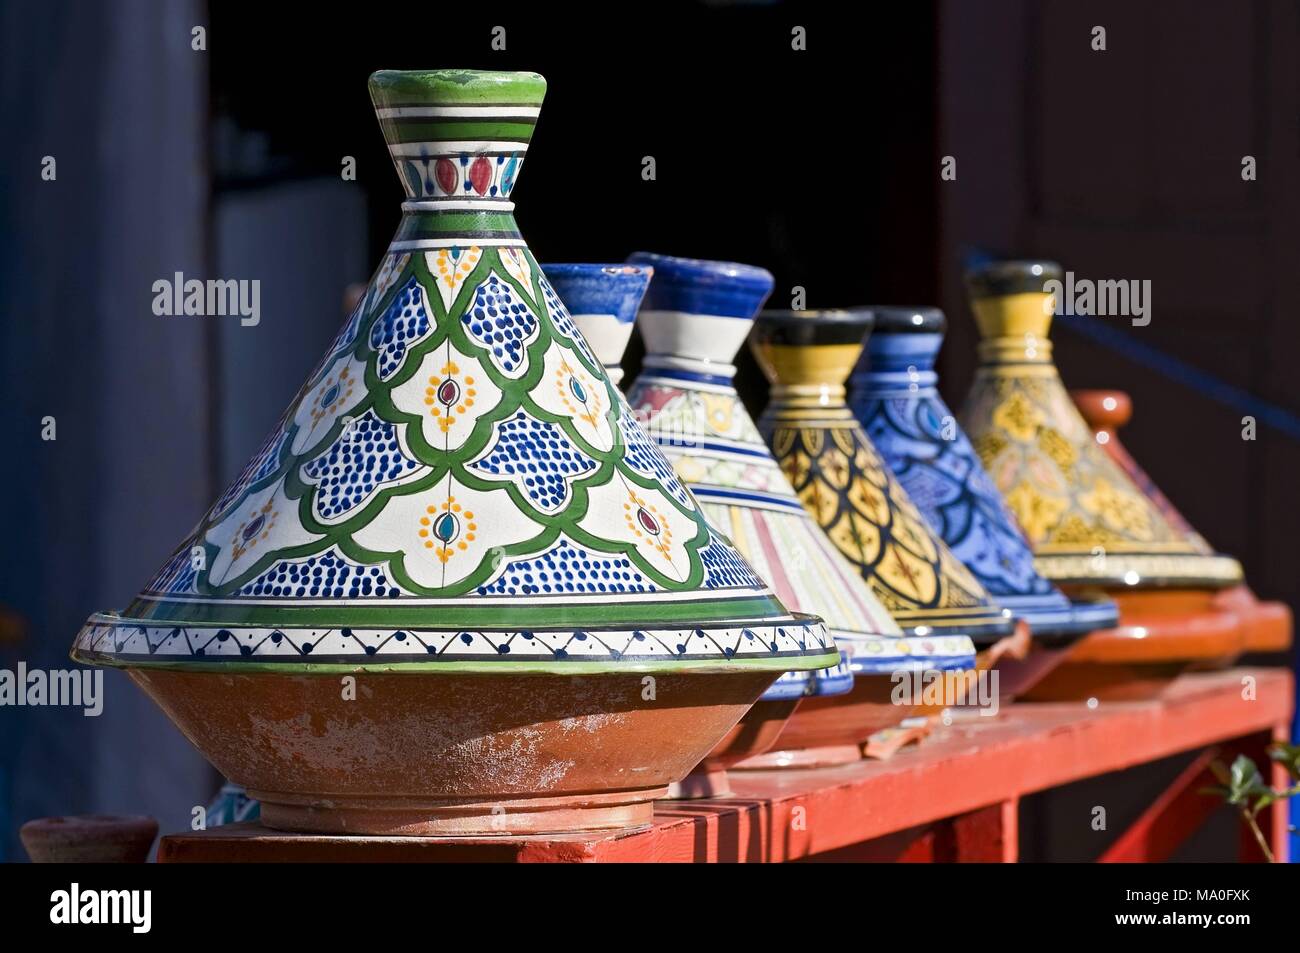 Colorful tagine souvenirs for sale in a shop in Morocco. Stock Photo